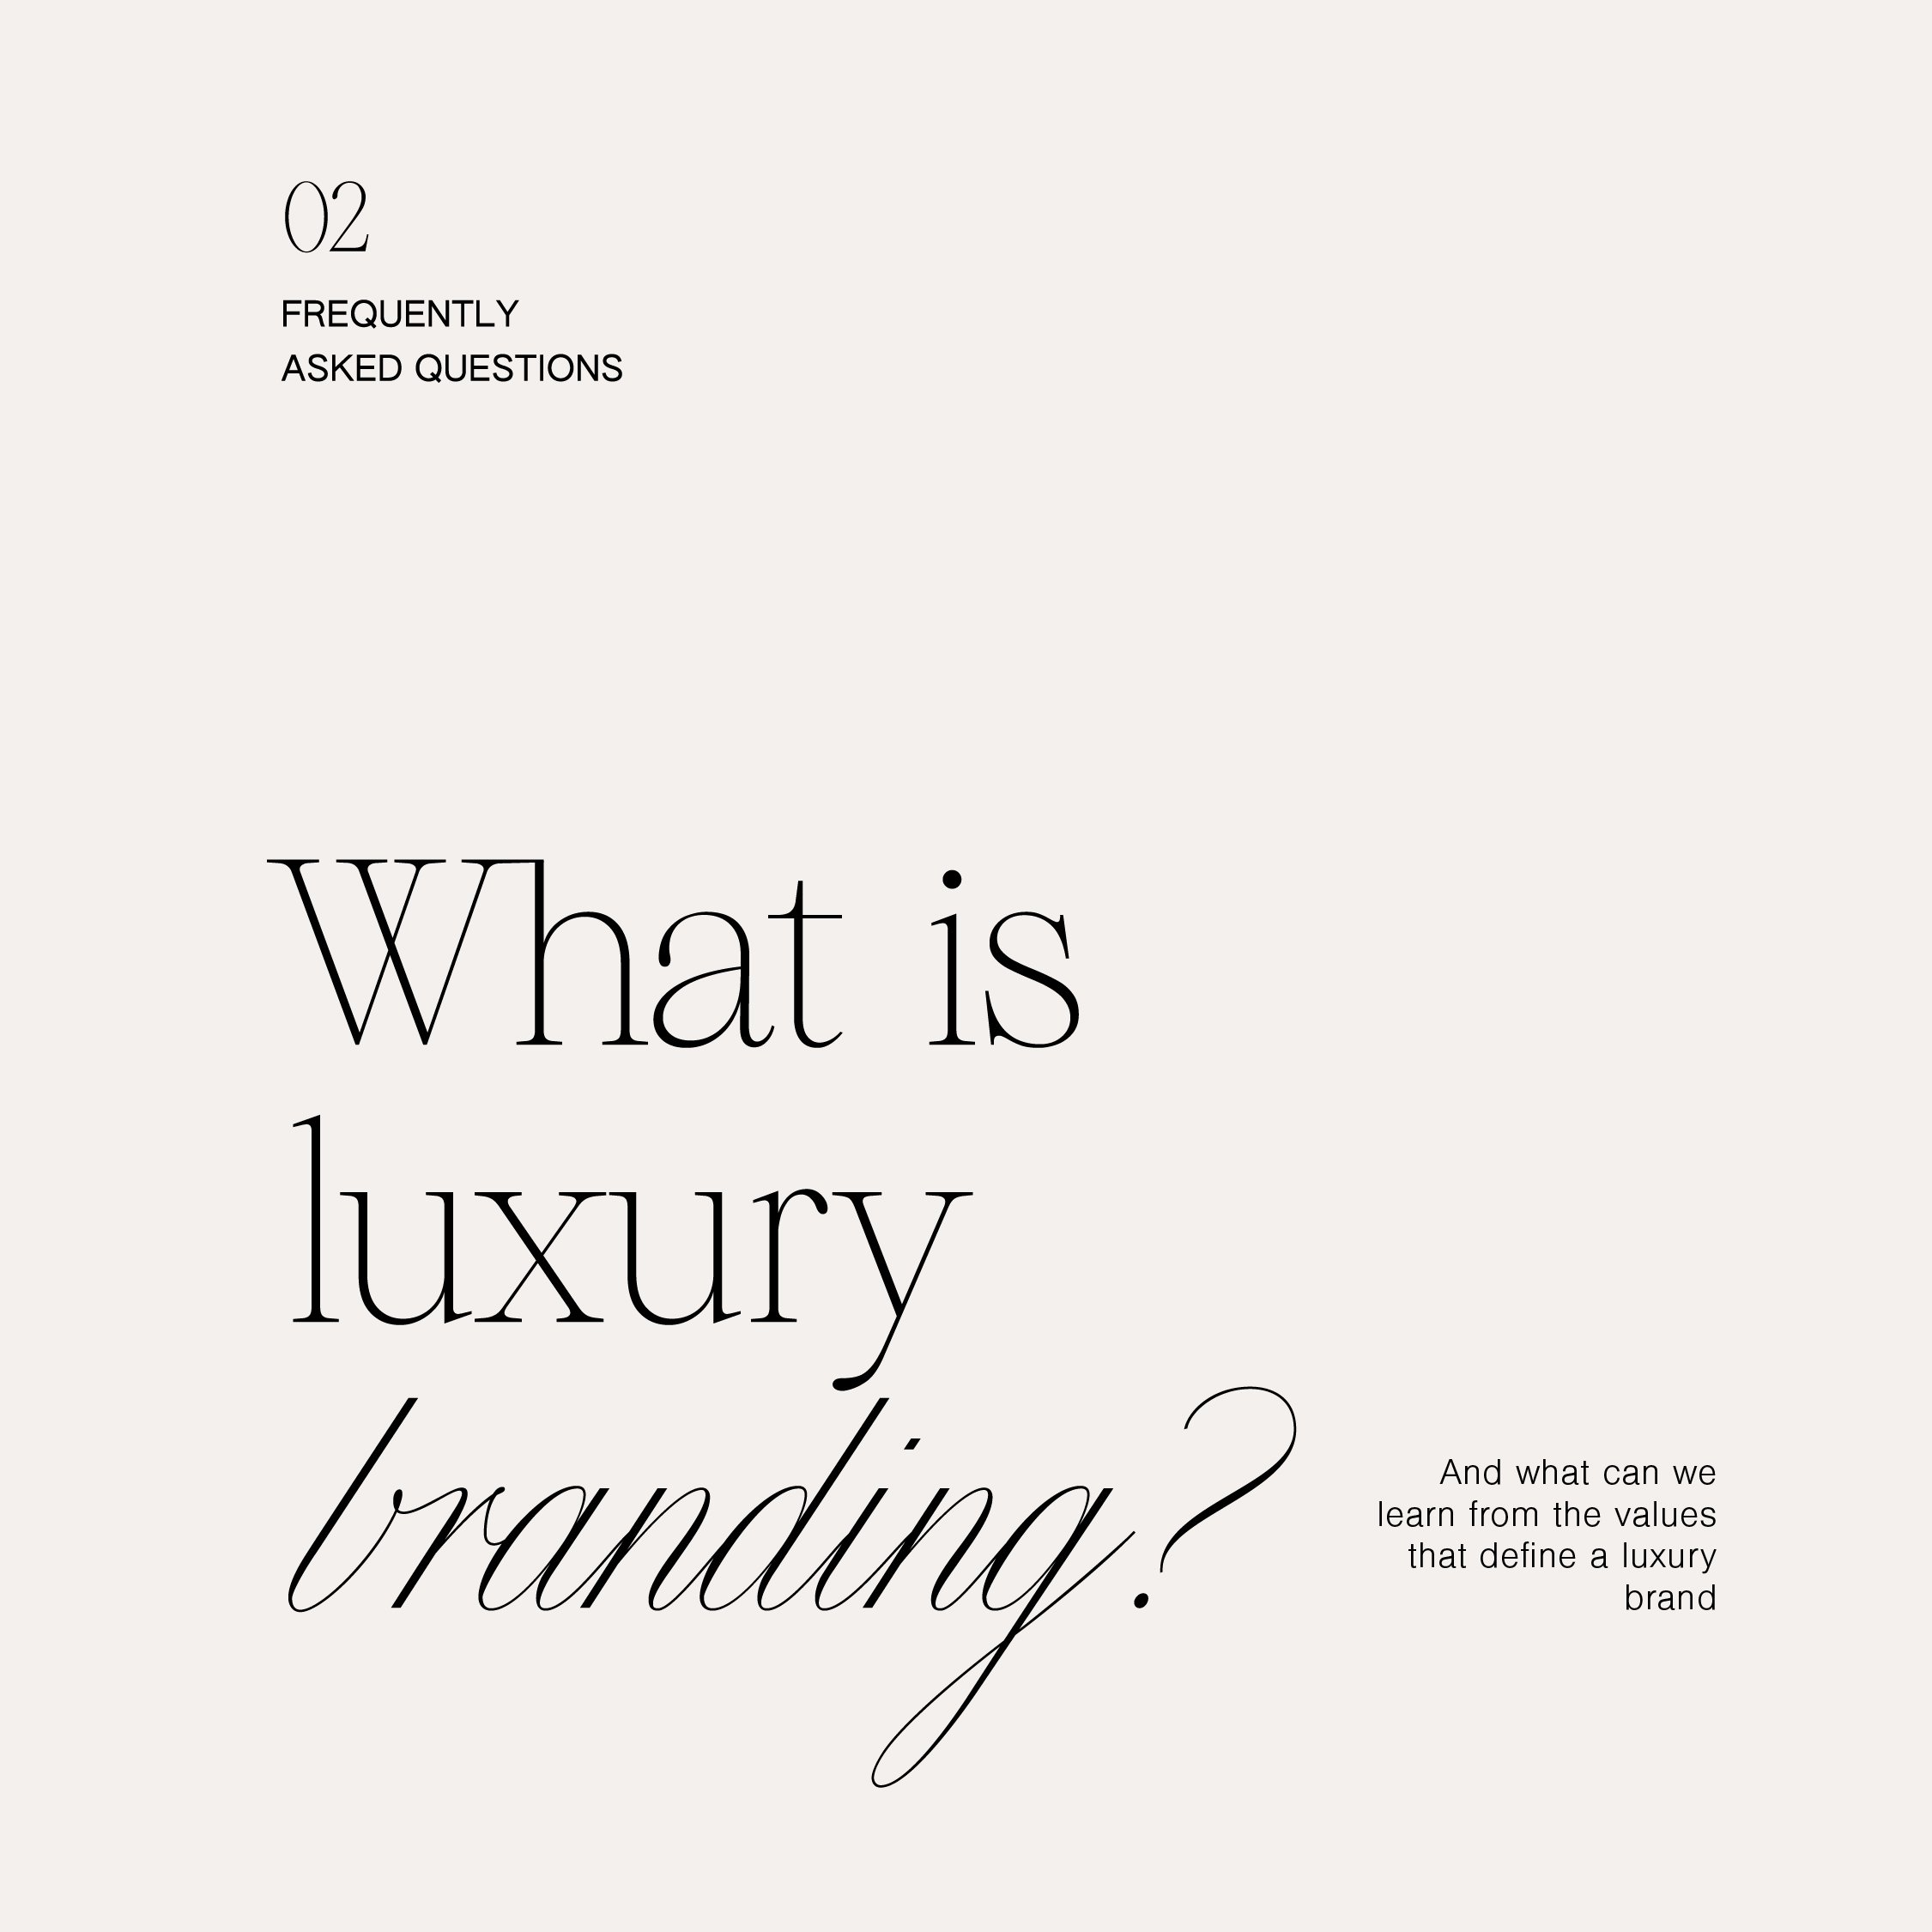 Deep-dive into customer feedback for 4 luxury brands